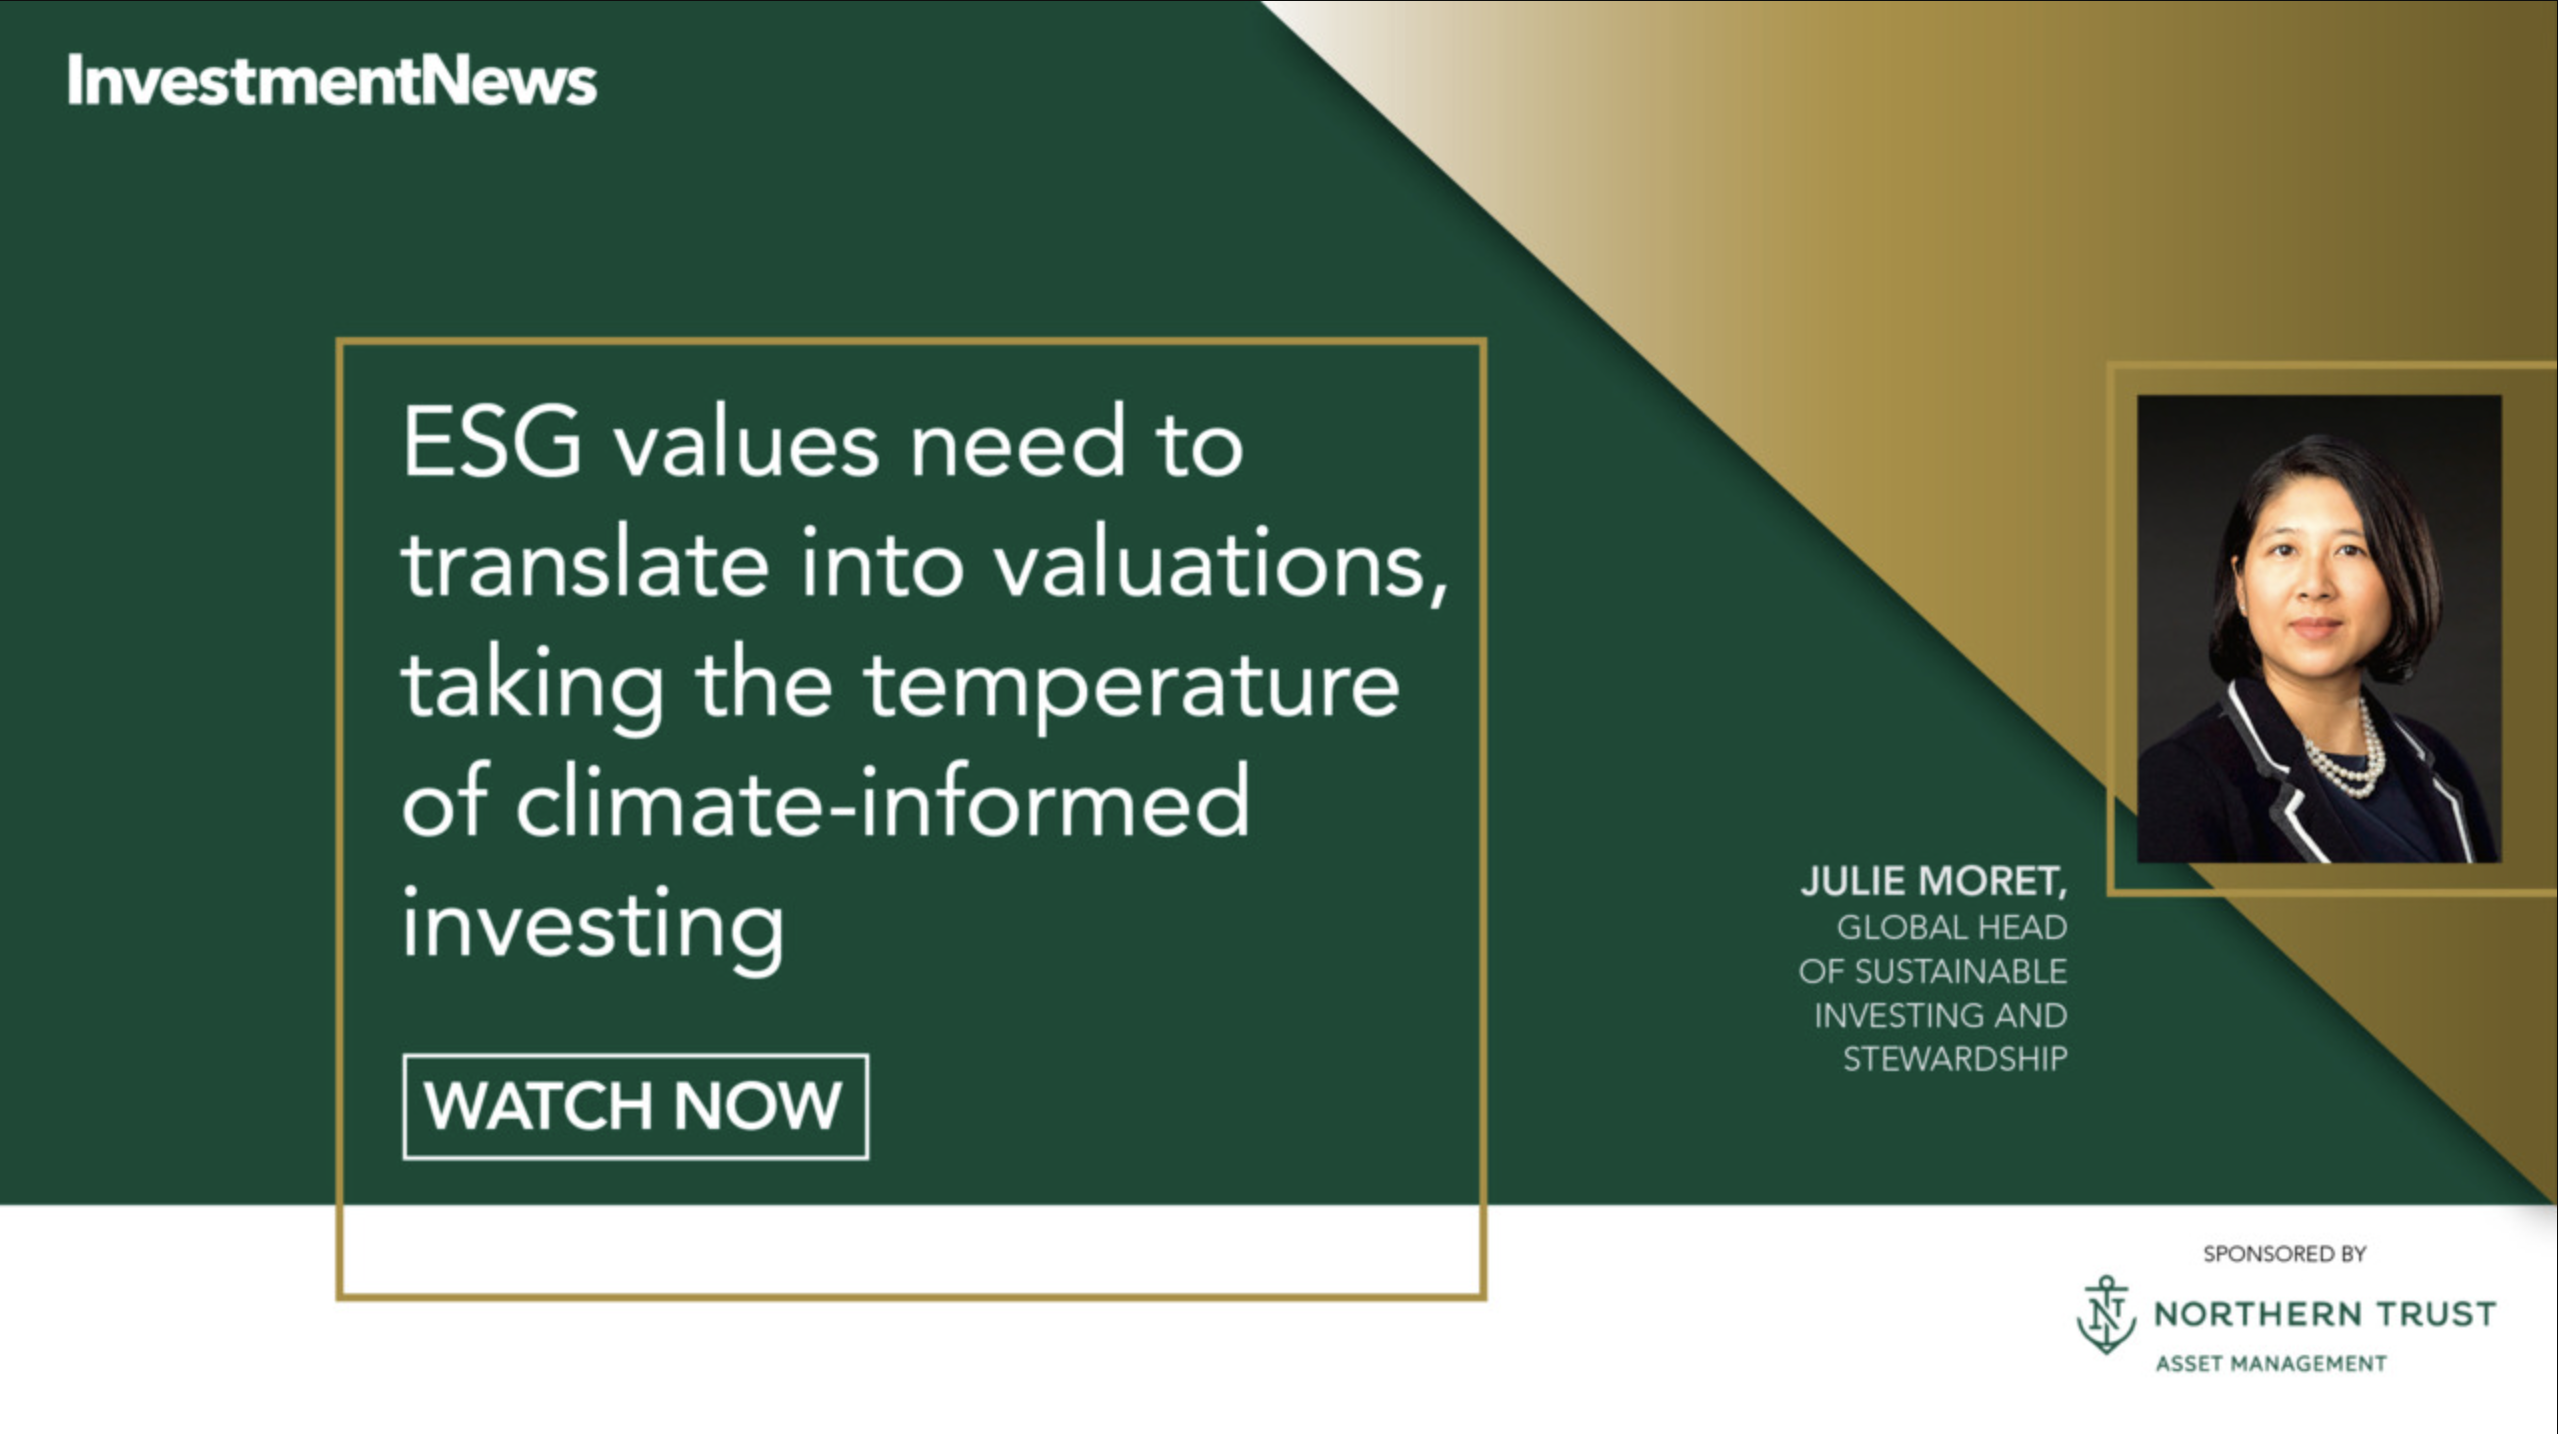 ESG values need to translate into valuations, taking the temperature of climate-informed investing